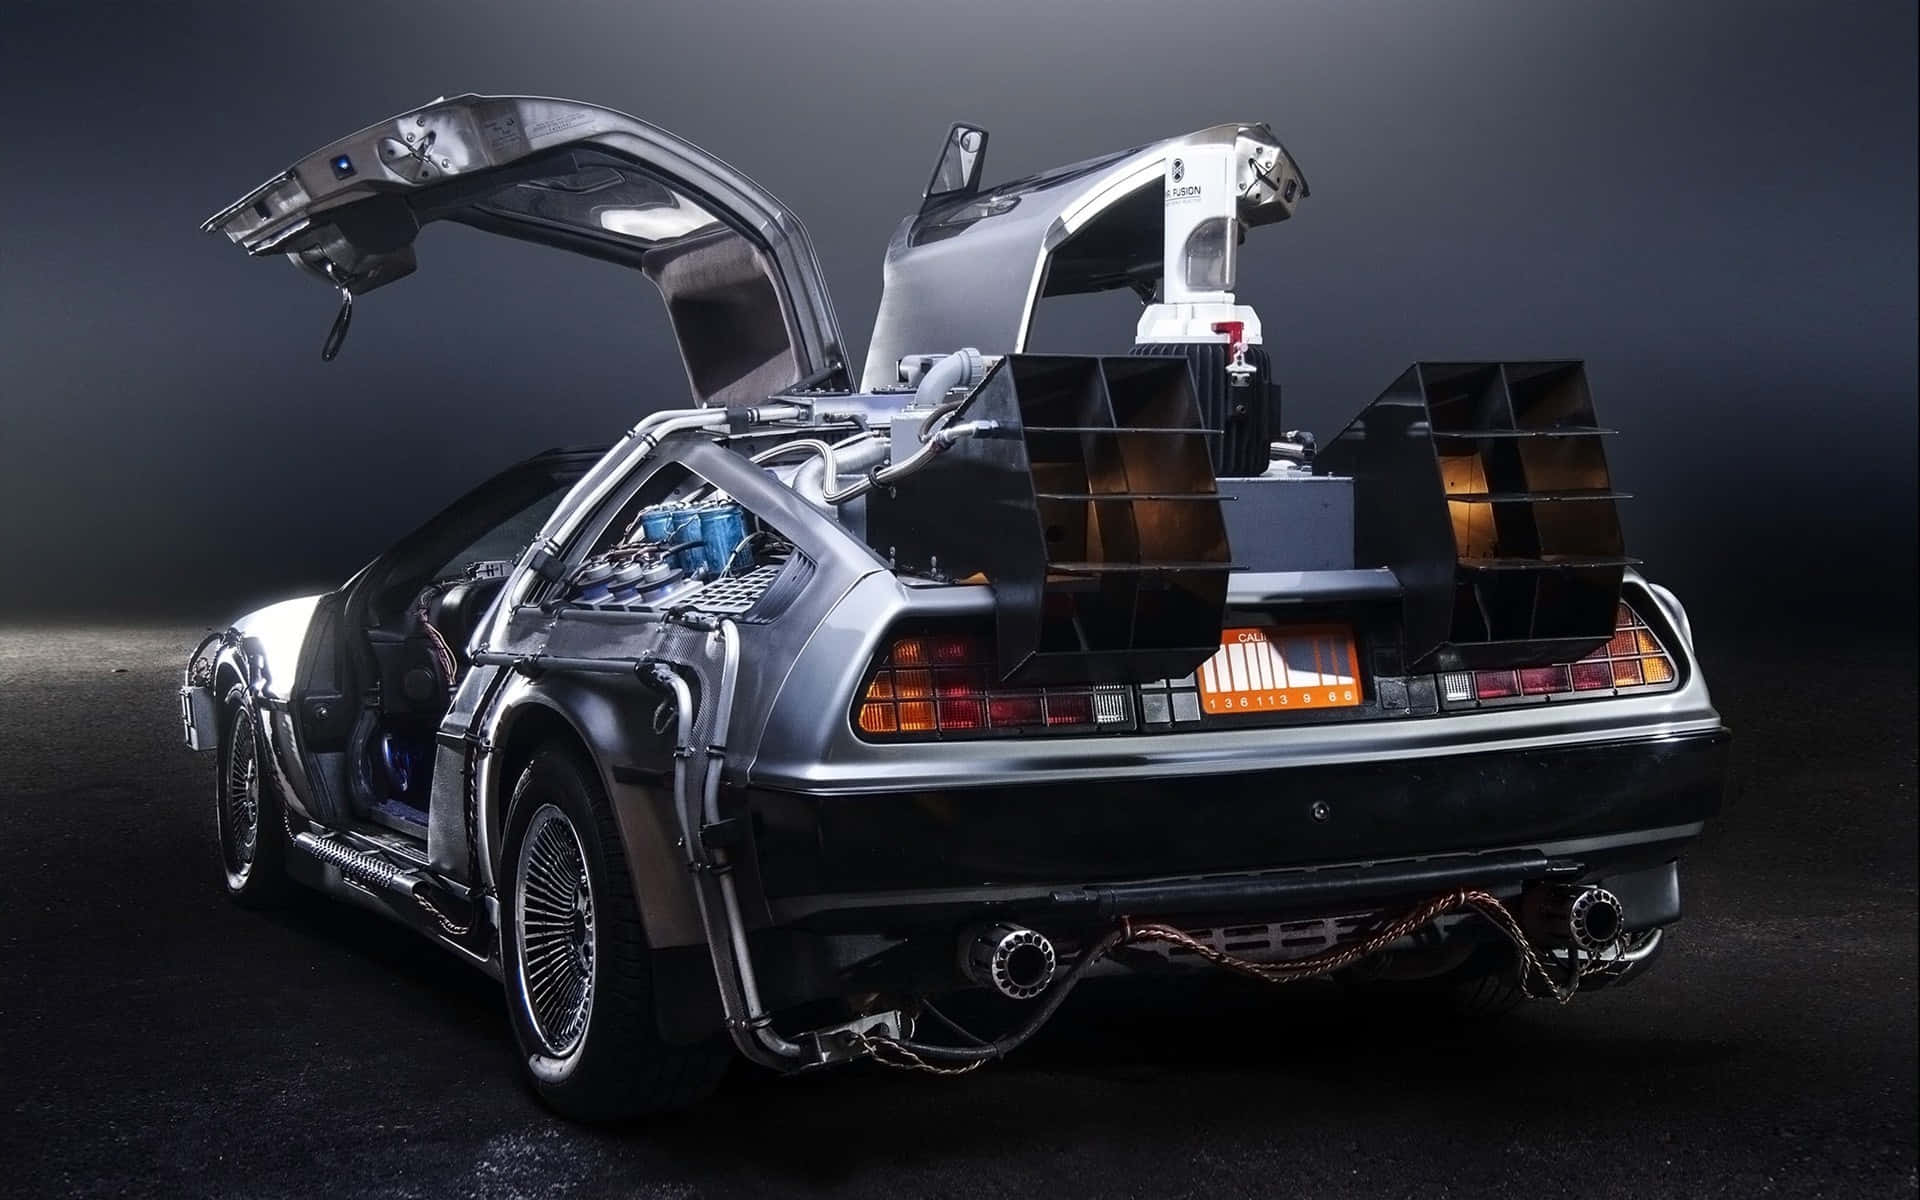 A Blast to the Past with Doc and Marty